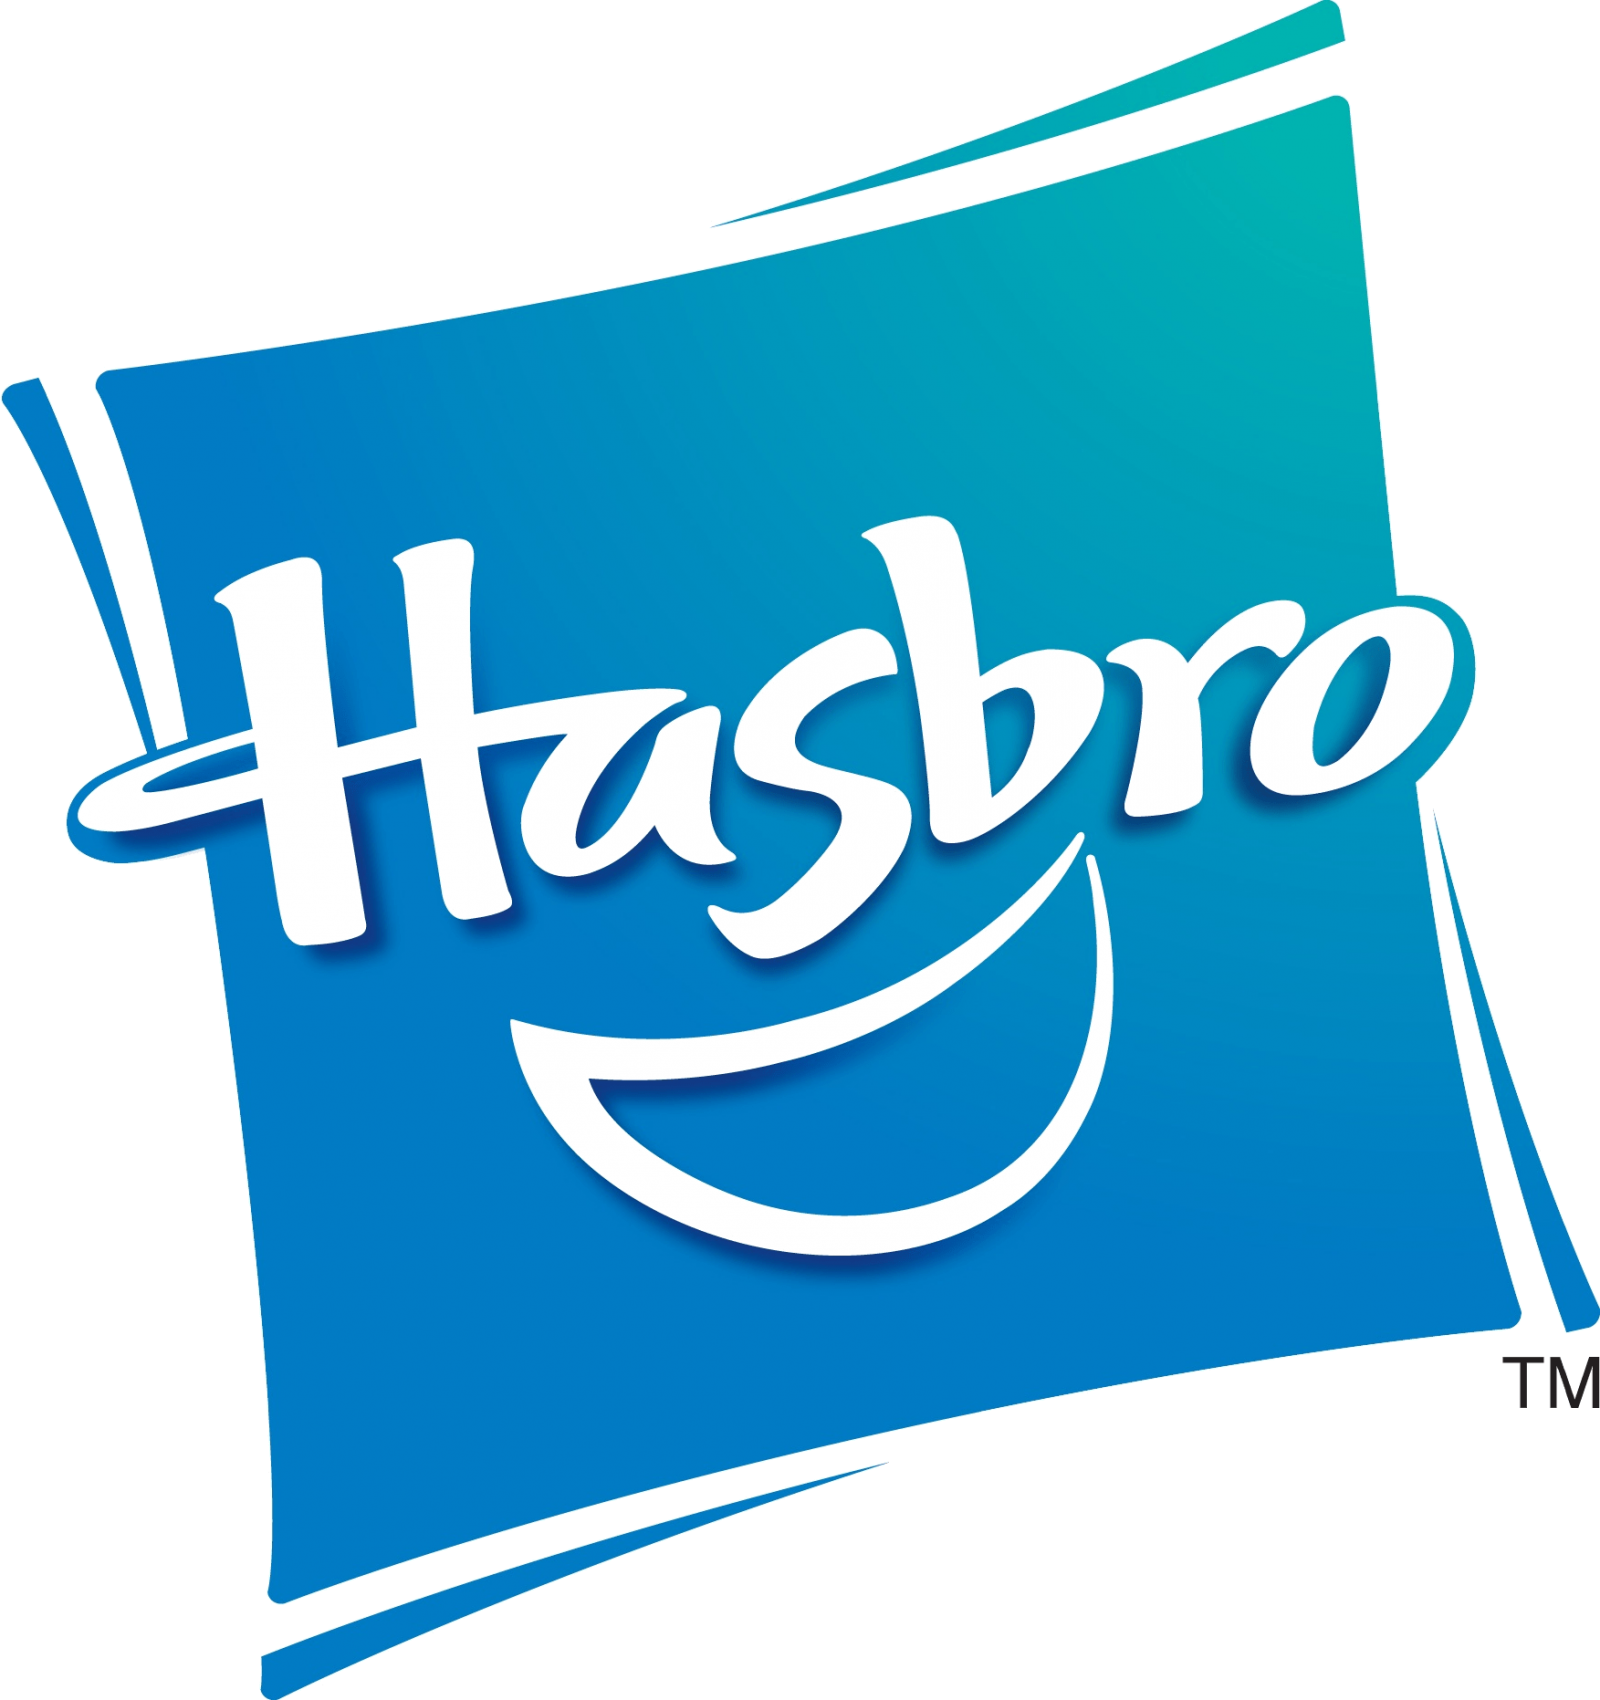 Transformers News: Hasbro To Raise Prices As Costs Rise